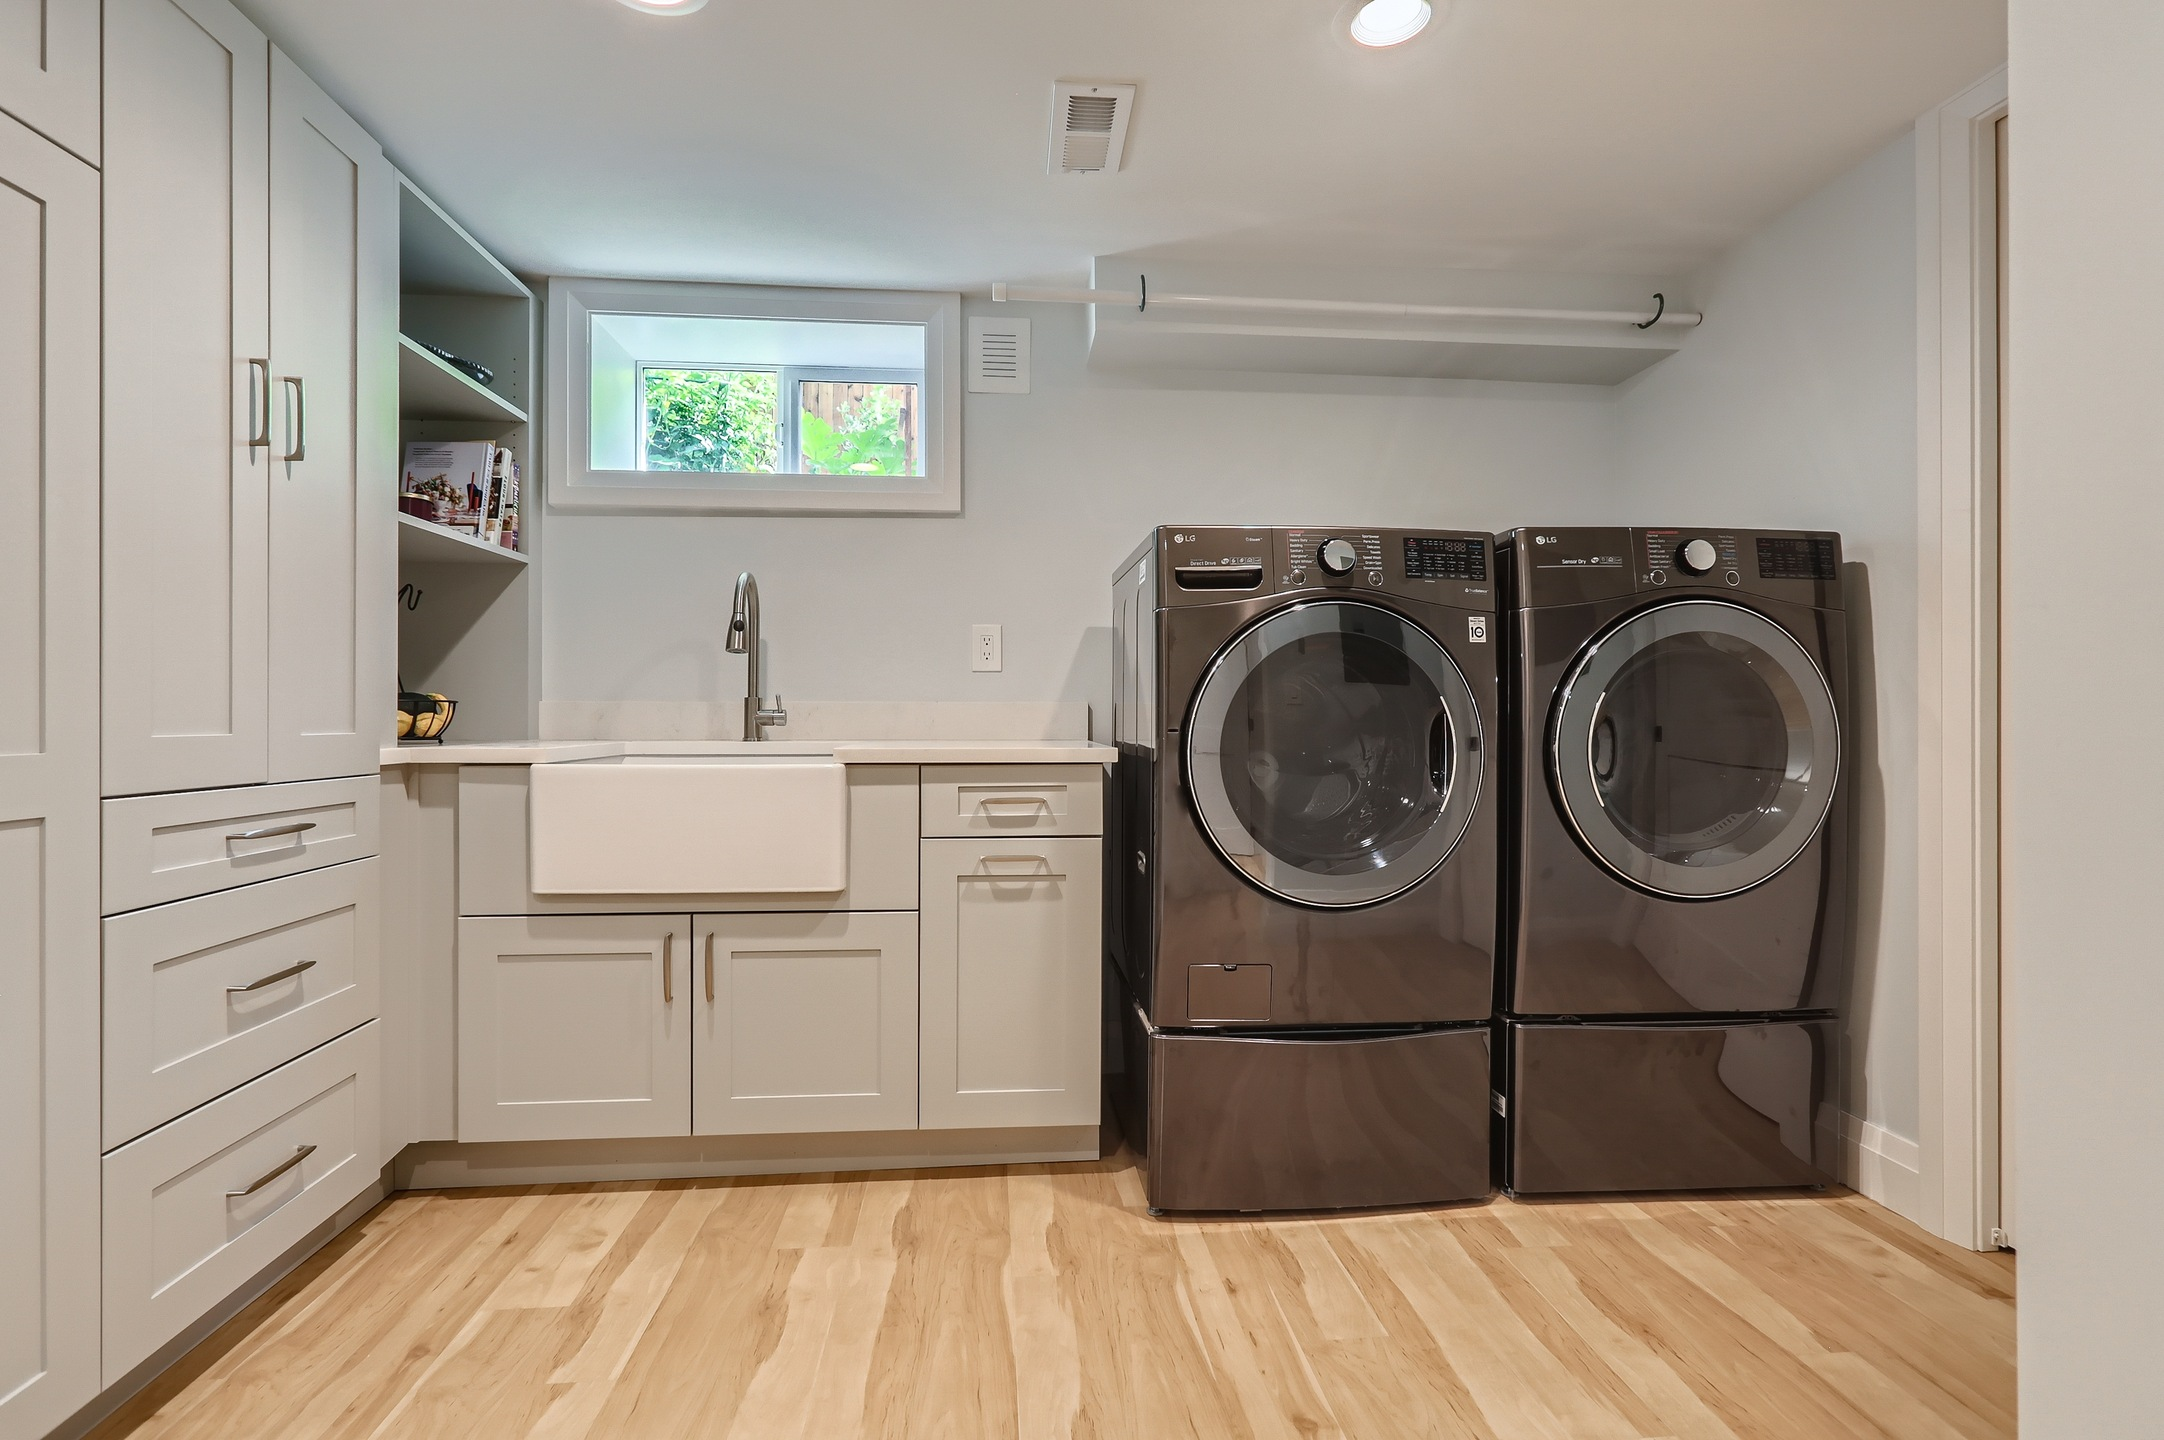 Washer and Dryer Solutions for Apartments Without Hookups - Survey 1 Inc